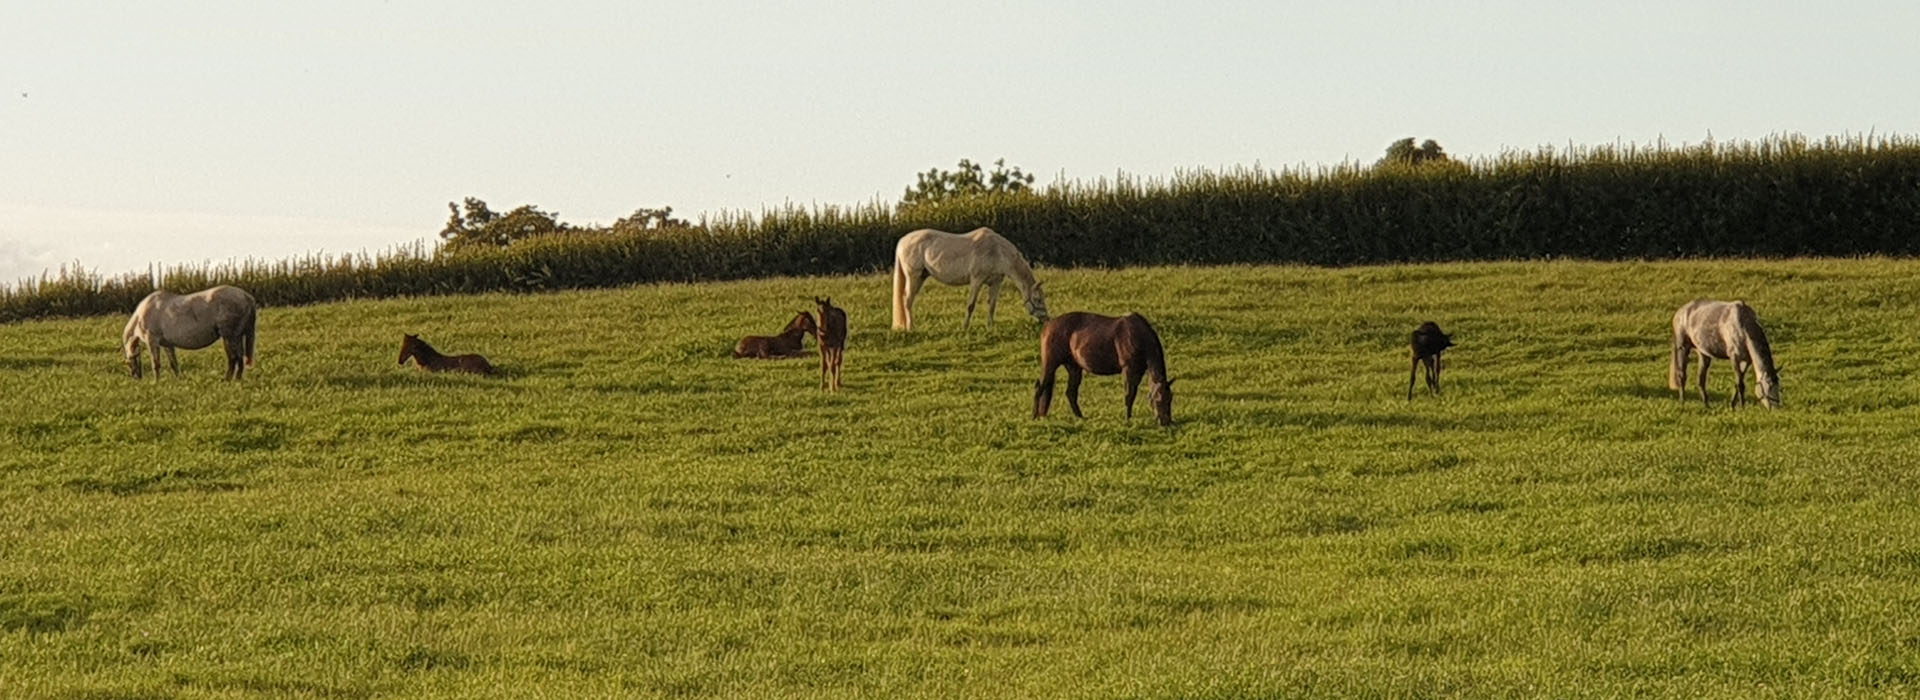 Mare and Foal - EquiBreed NZ Ltd